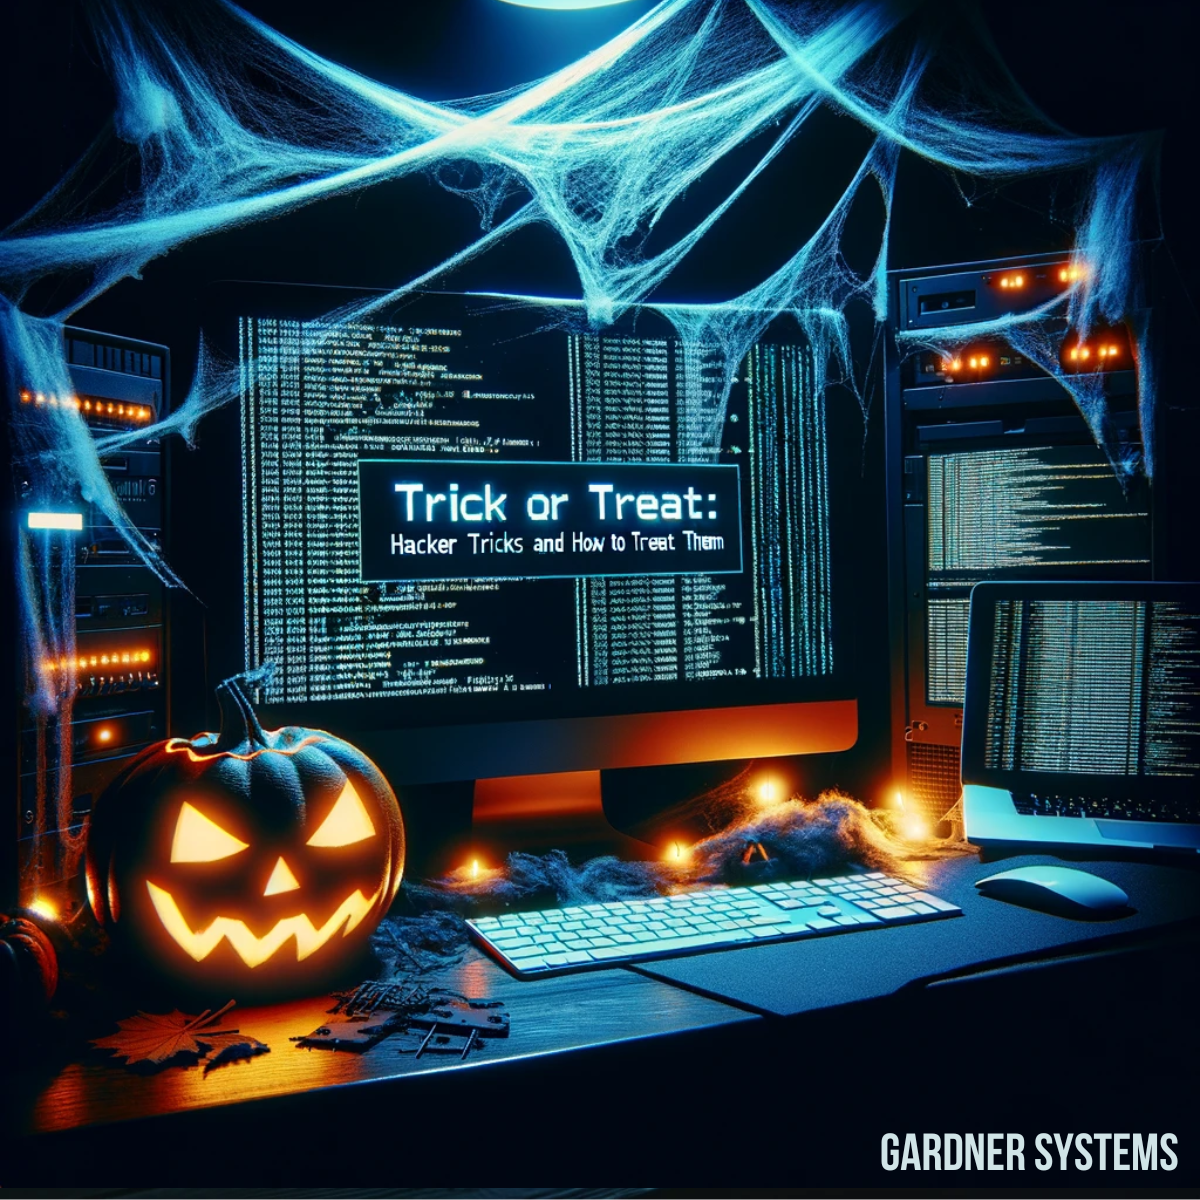 Trick or Treat: Hacker’s tricks and how to treat them